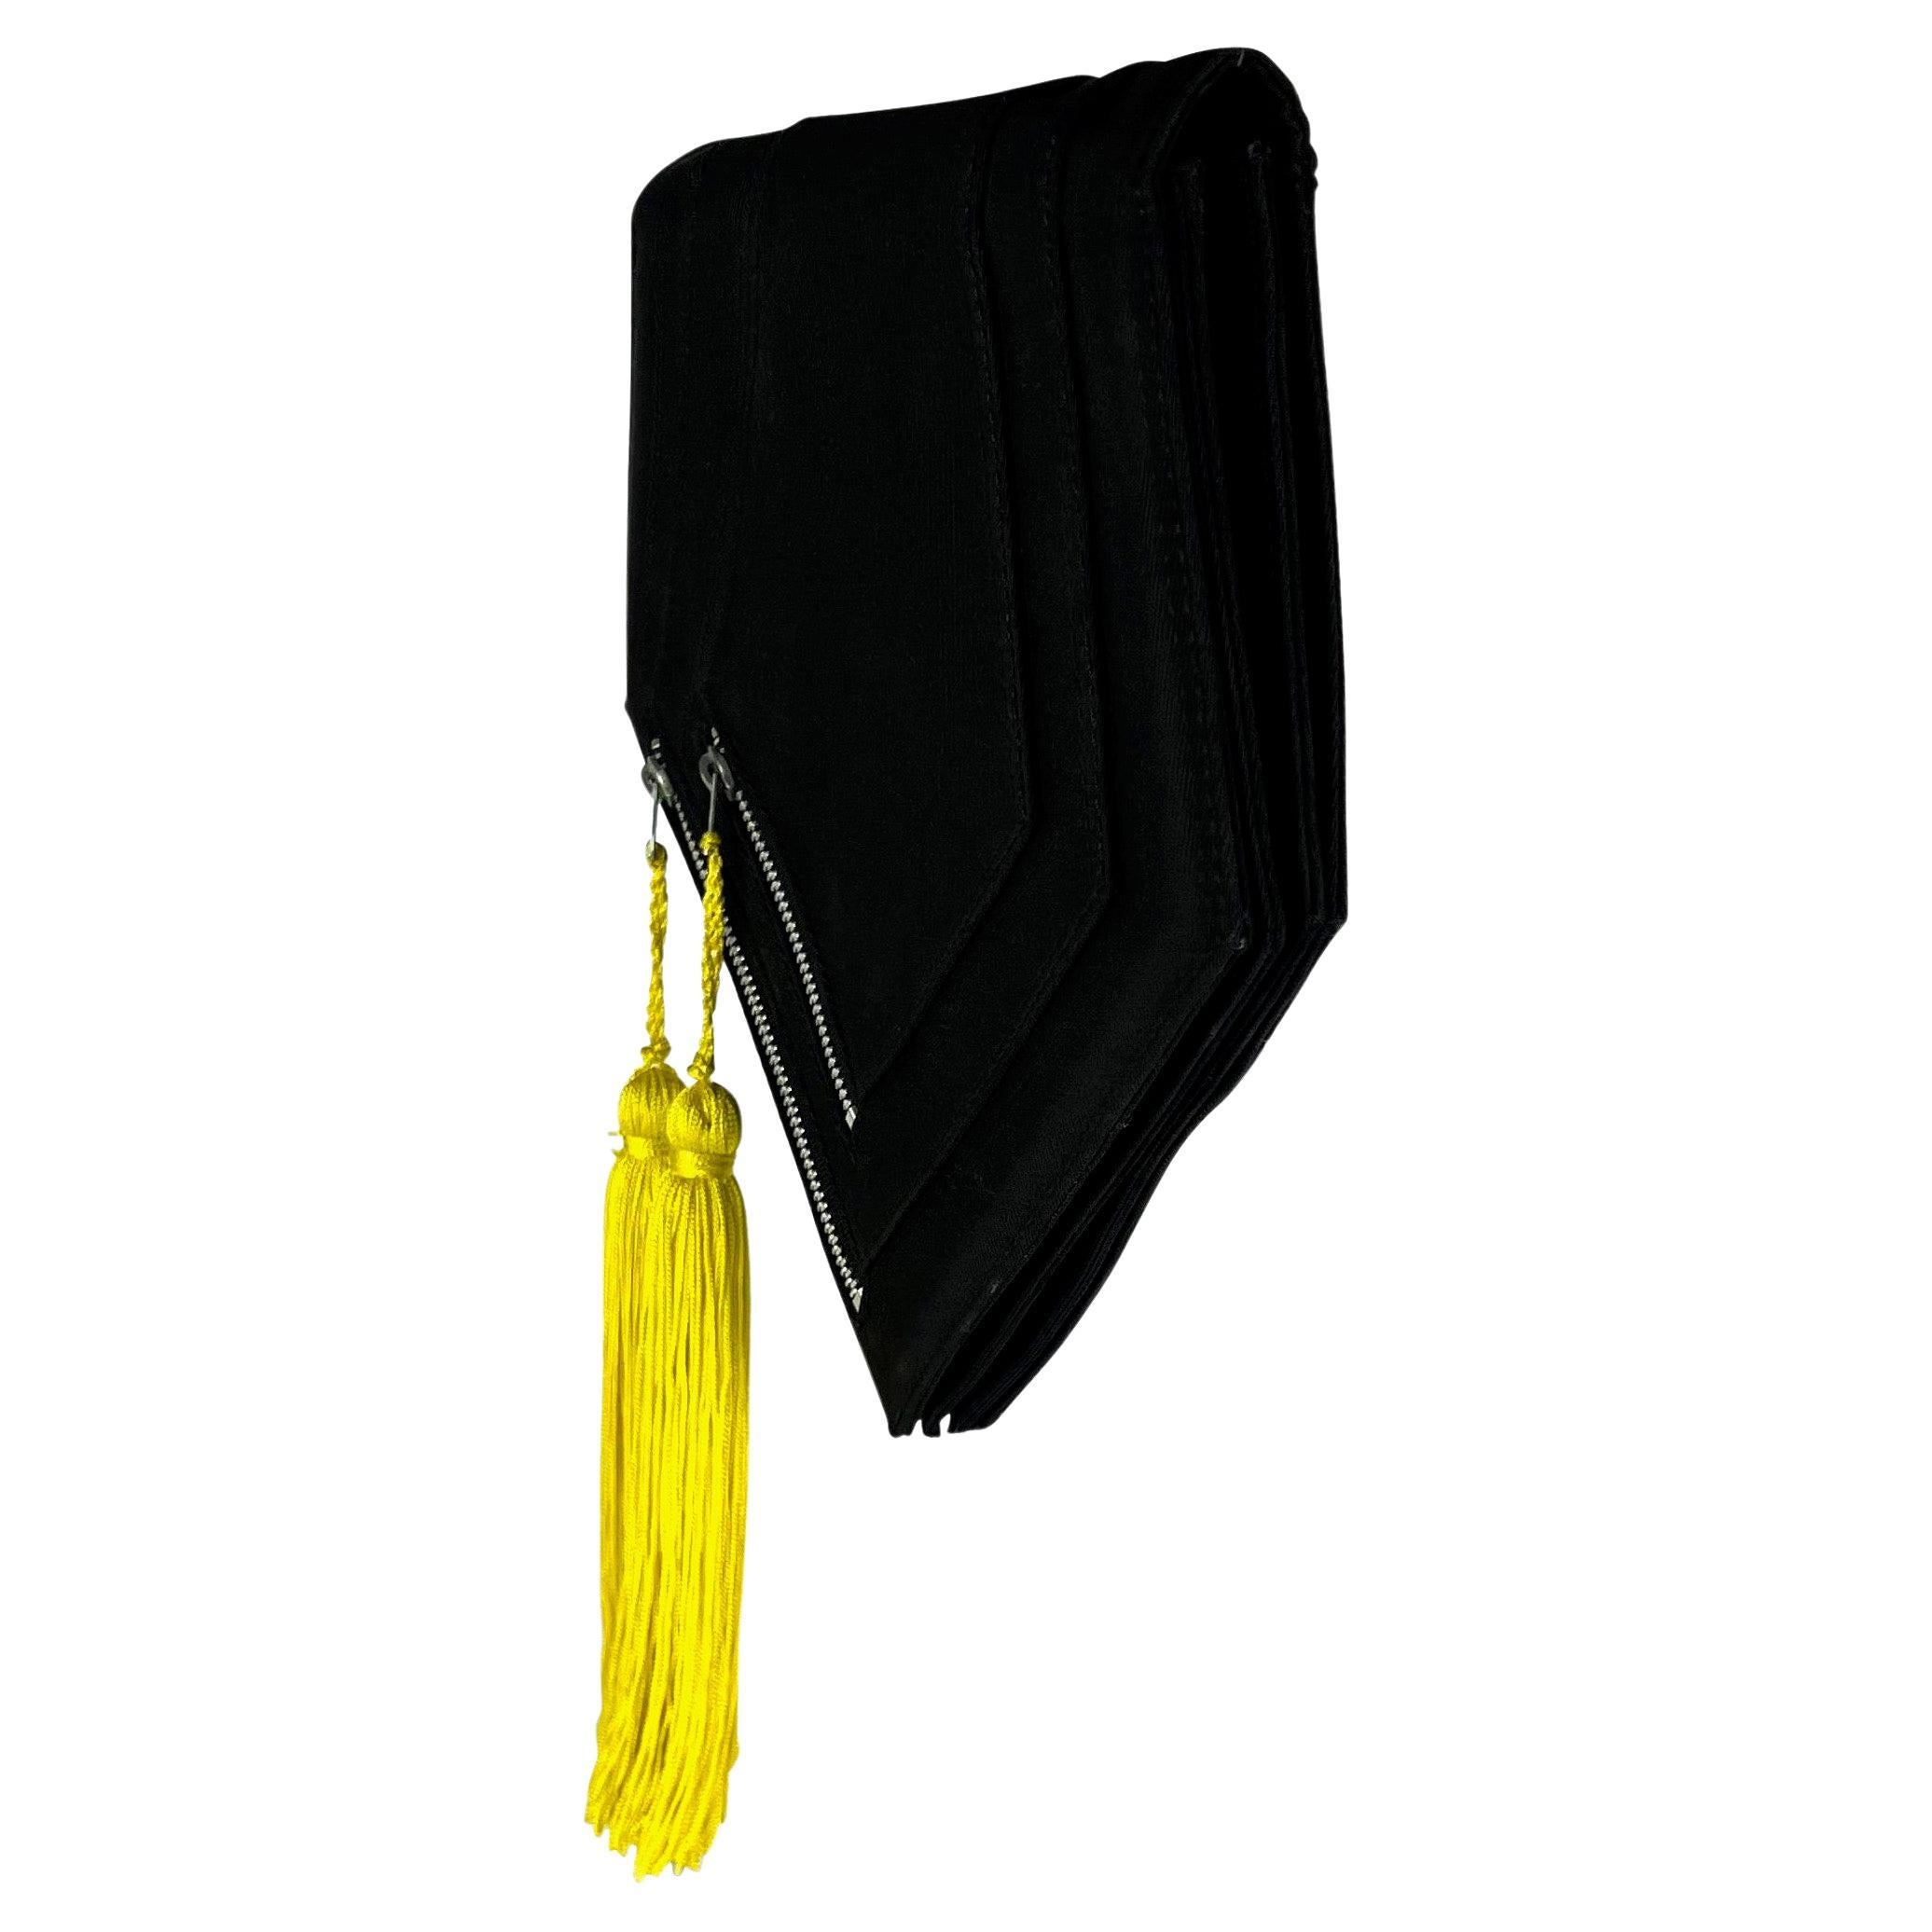 Presenting  a black fabric Gianni Versace clutch, designed by Gianni Versace. From the Spring/Summer 1989 collection, this hexagon flap clutch features two exterior pockets with yellow tassel zipper accents. A fabulous piece of early Versace, this